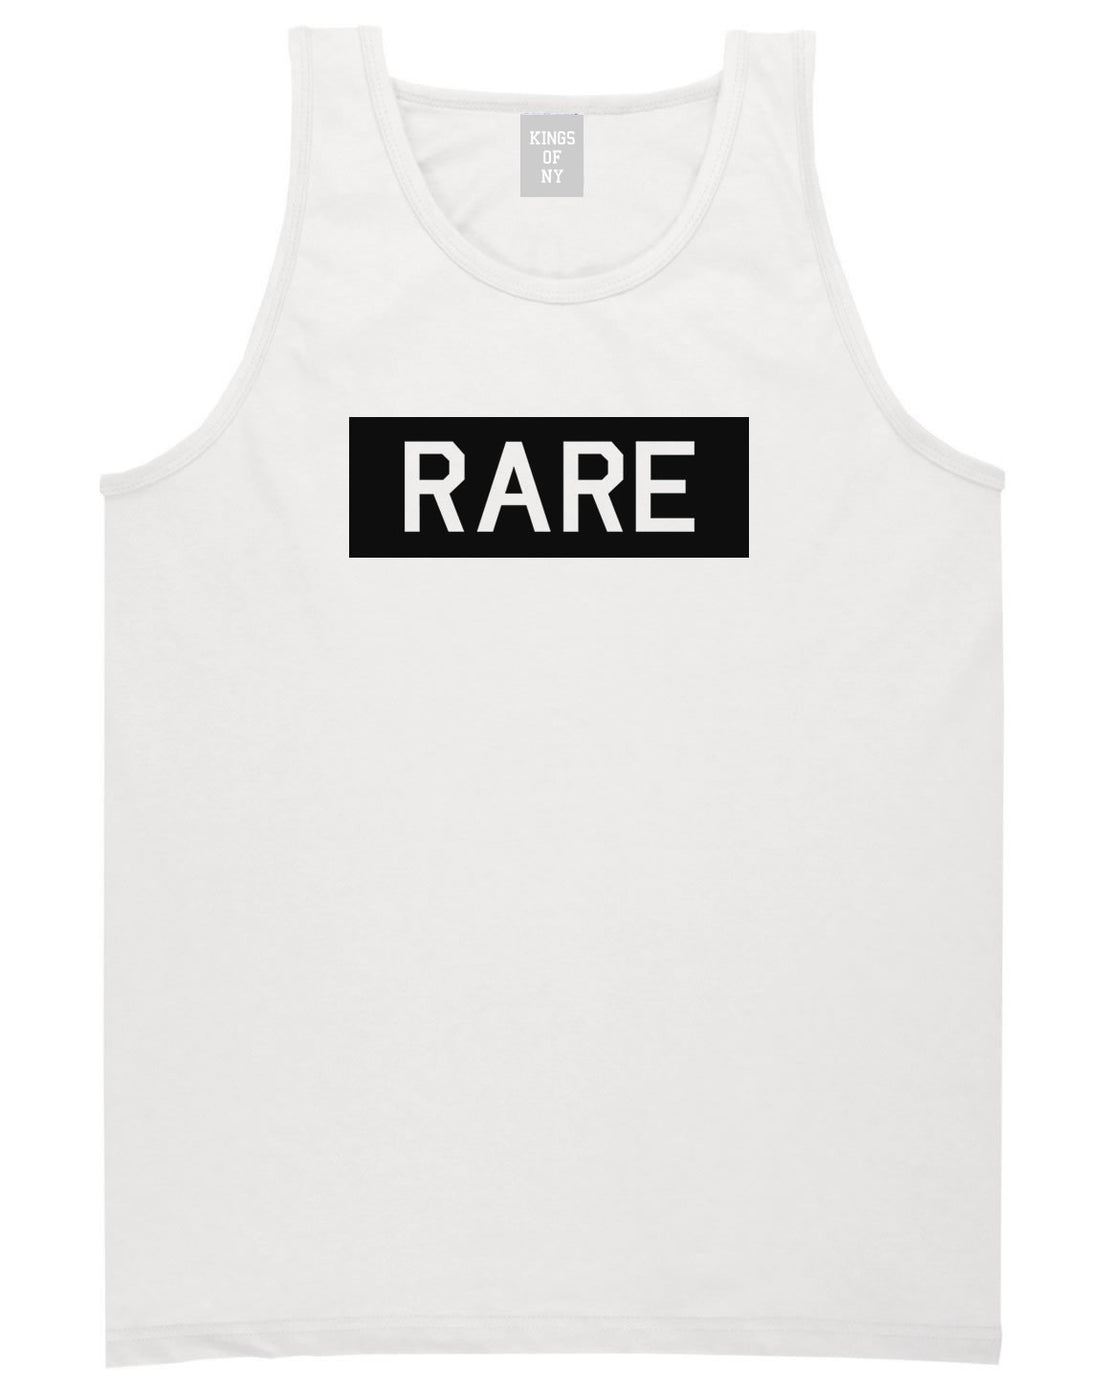 Rare College Block Tank Top in White by Kings Of NY